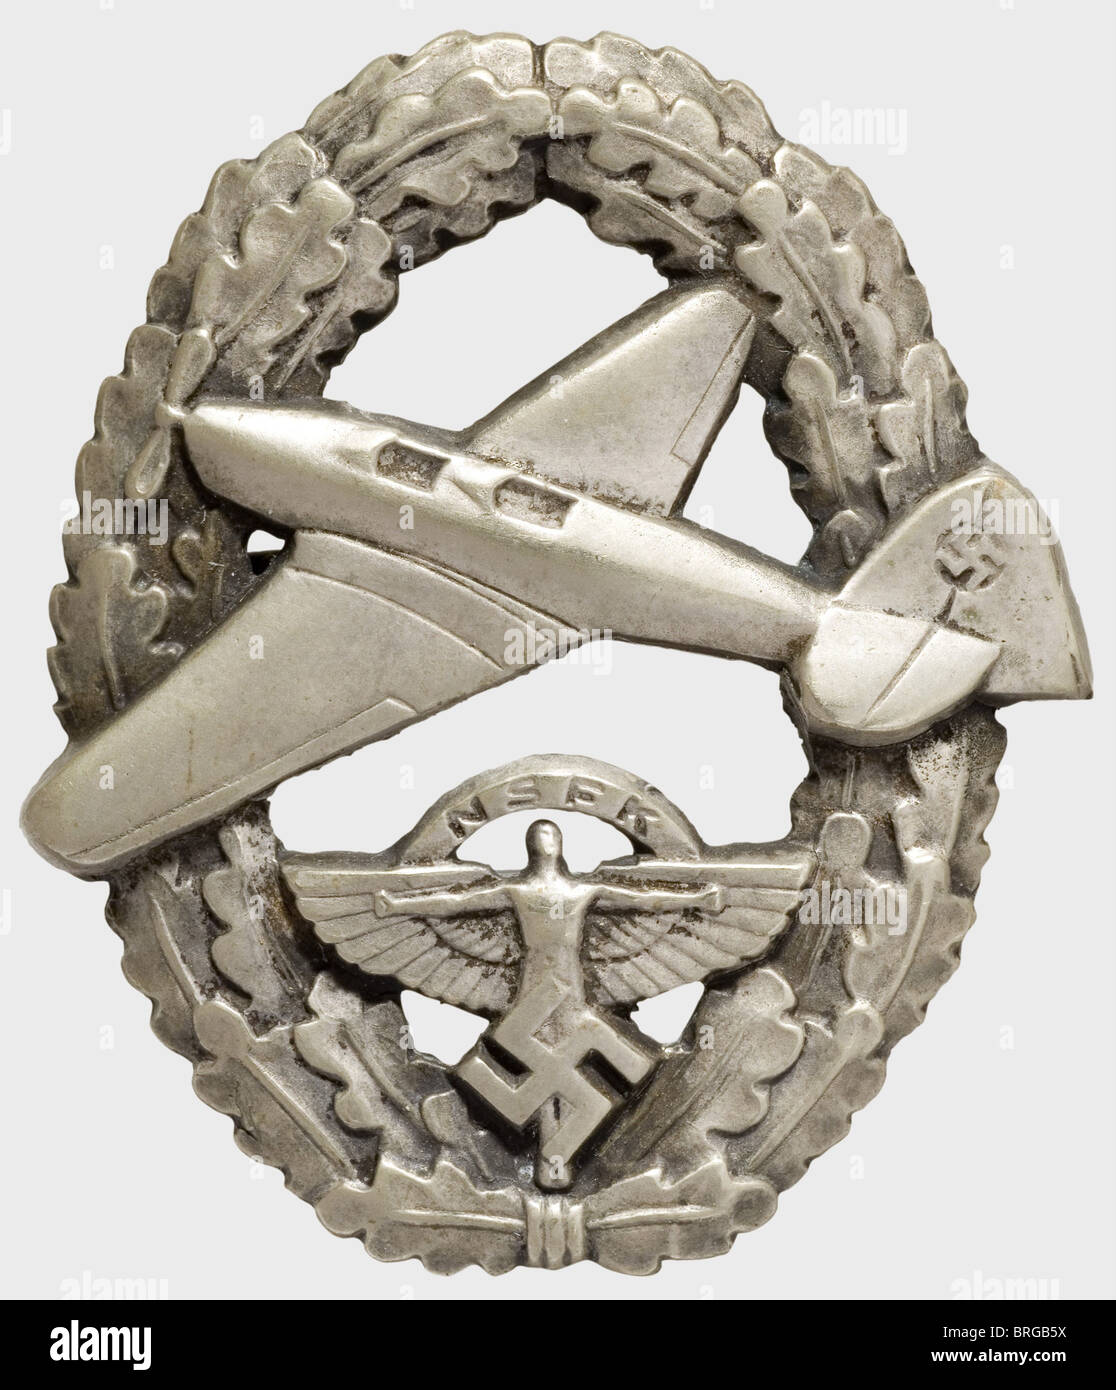 A NSFK Badge for Powered Aircraft Pilot,2nd issue after 1939 Silver-plated non-ferrous metal,hollow-stamped,the reverse marked 'Ges Gesch 22638',flat nickel silver pin attachment(OEK 3673). The badge introduced on 1 May 1939 superseded the earlier,silver-embroidered cloth issue badge and,as Christiansen wished,it bore the NSFK emblem instead of the swastika.,historic,historical,1930s,20th century,awards,award,German Reich,Third Reich,Nazi era,National Socialism,object,objects,stills,medal,decoration,medals,decorations,clipping,cut out,Additional-Rights-Clearences-Not Available Stock Photo